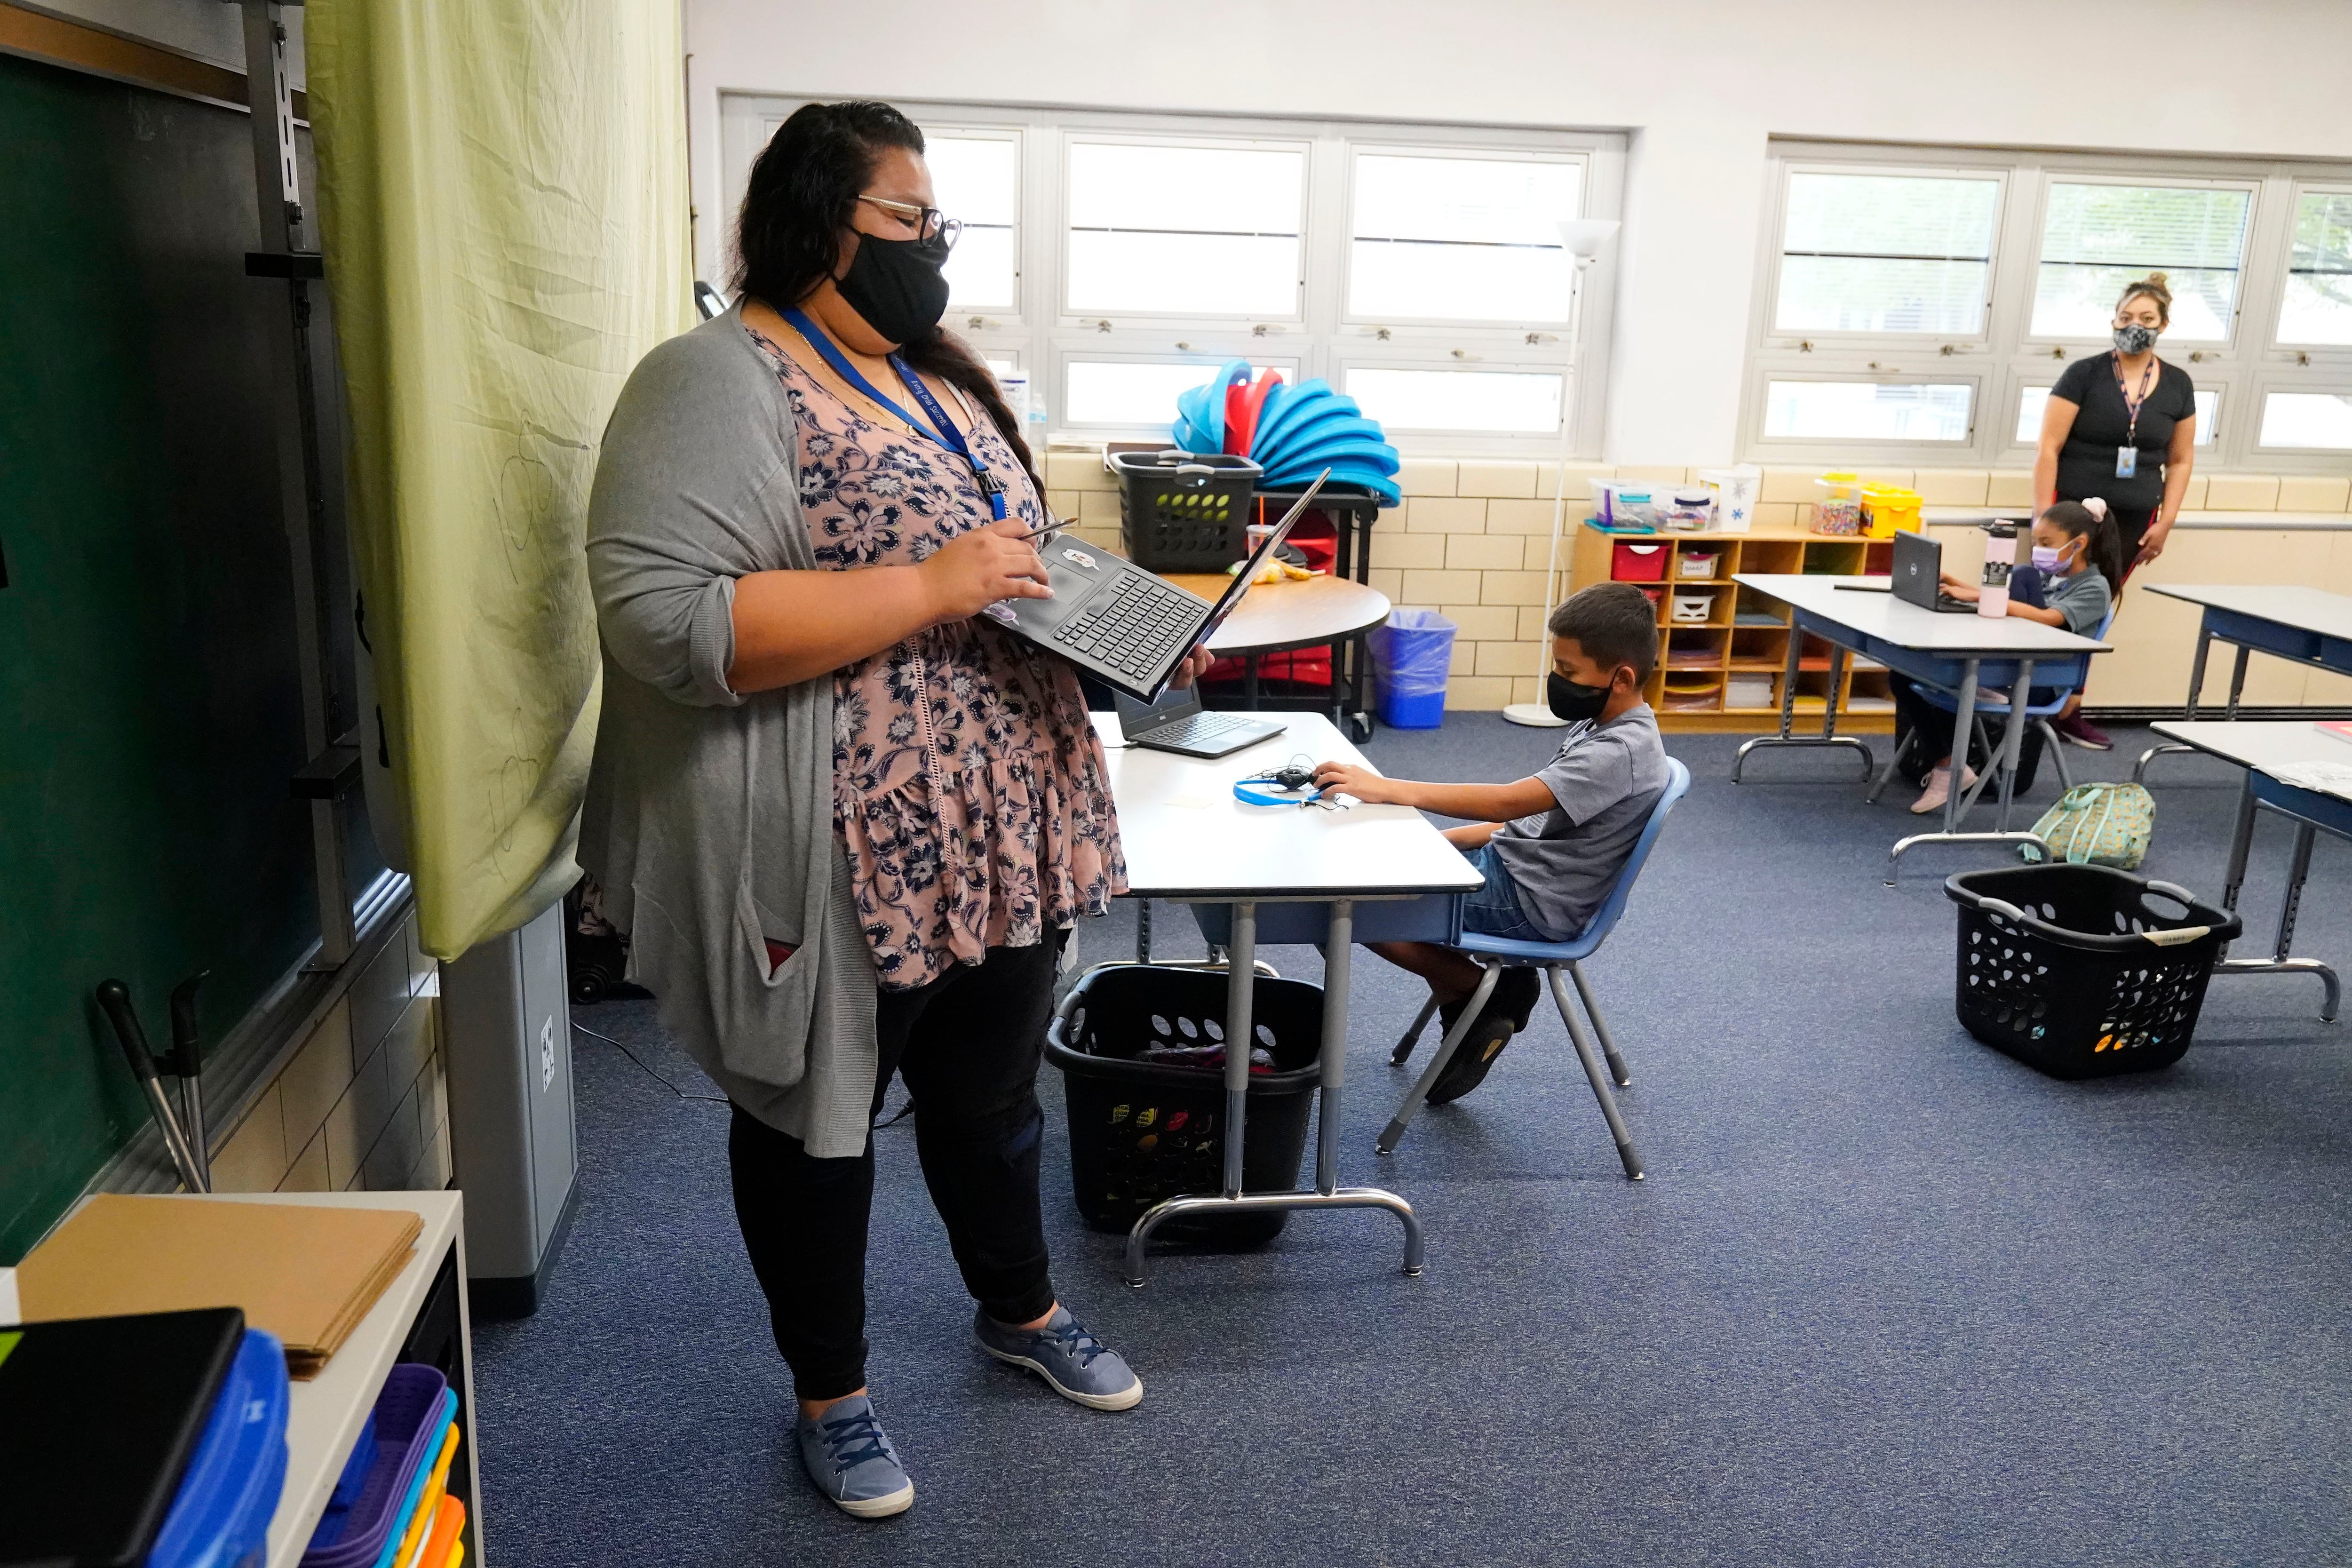 Teacher wearing a mask supervises students at a learning center.